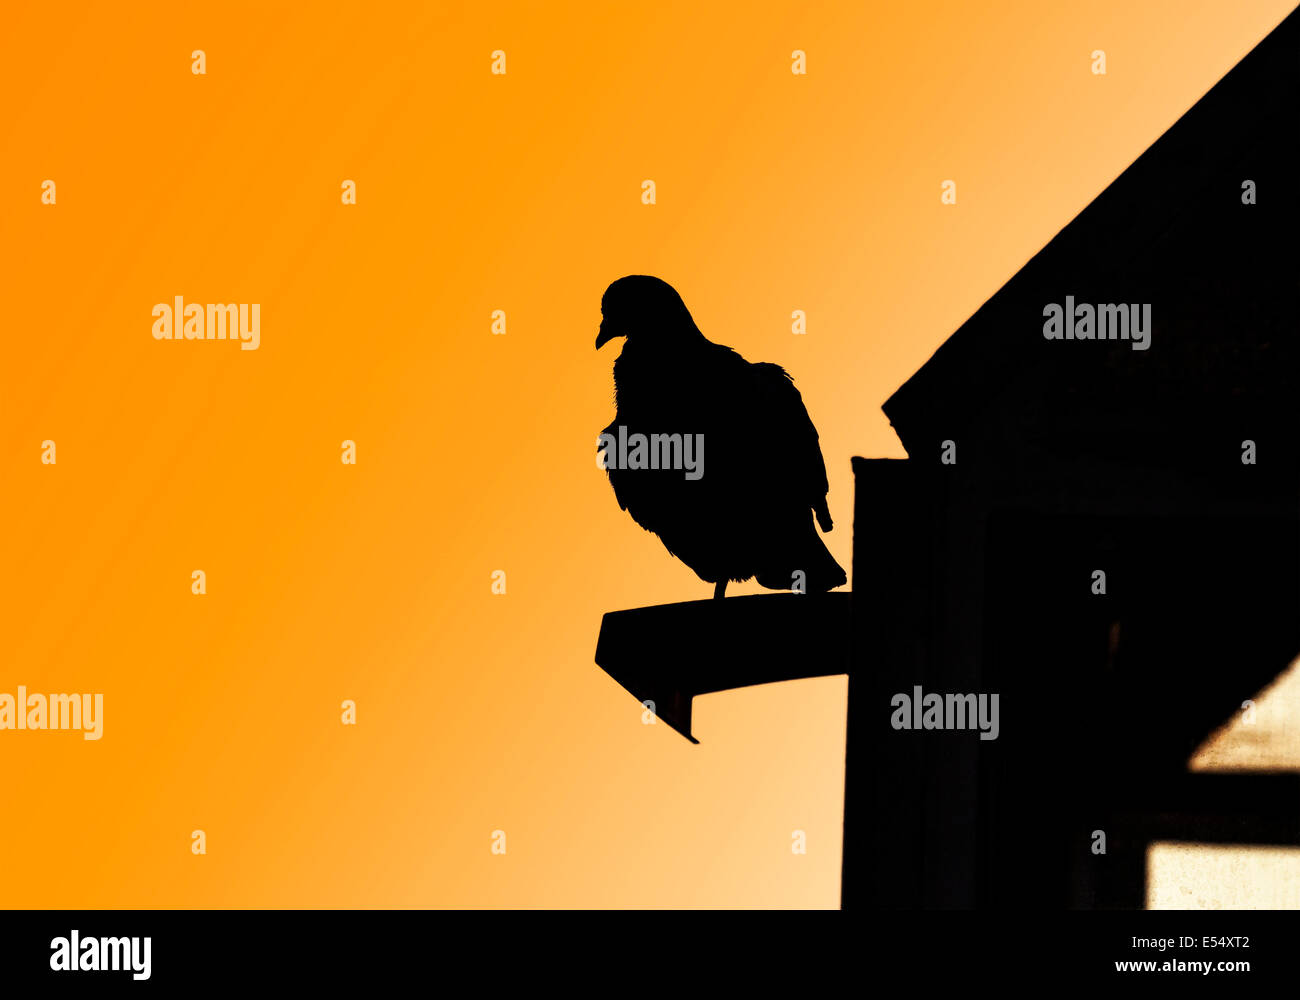 Pigeon black silhouette on roof. Stock Photo